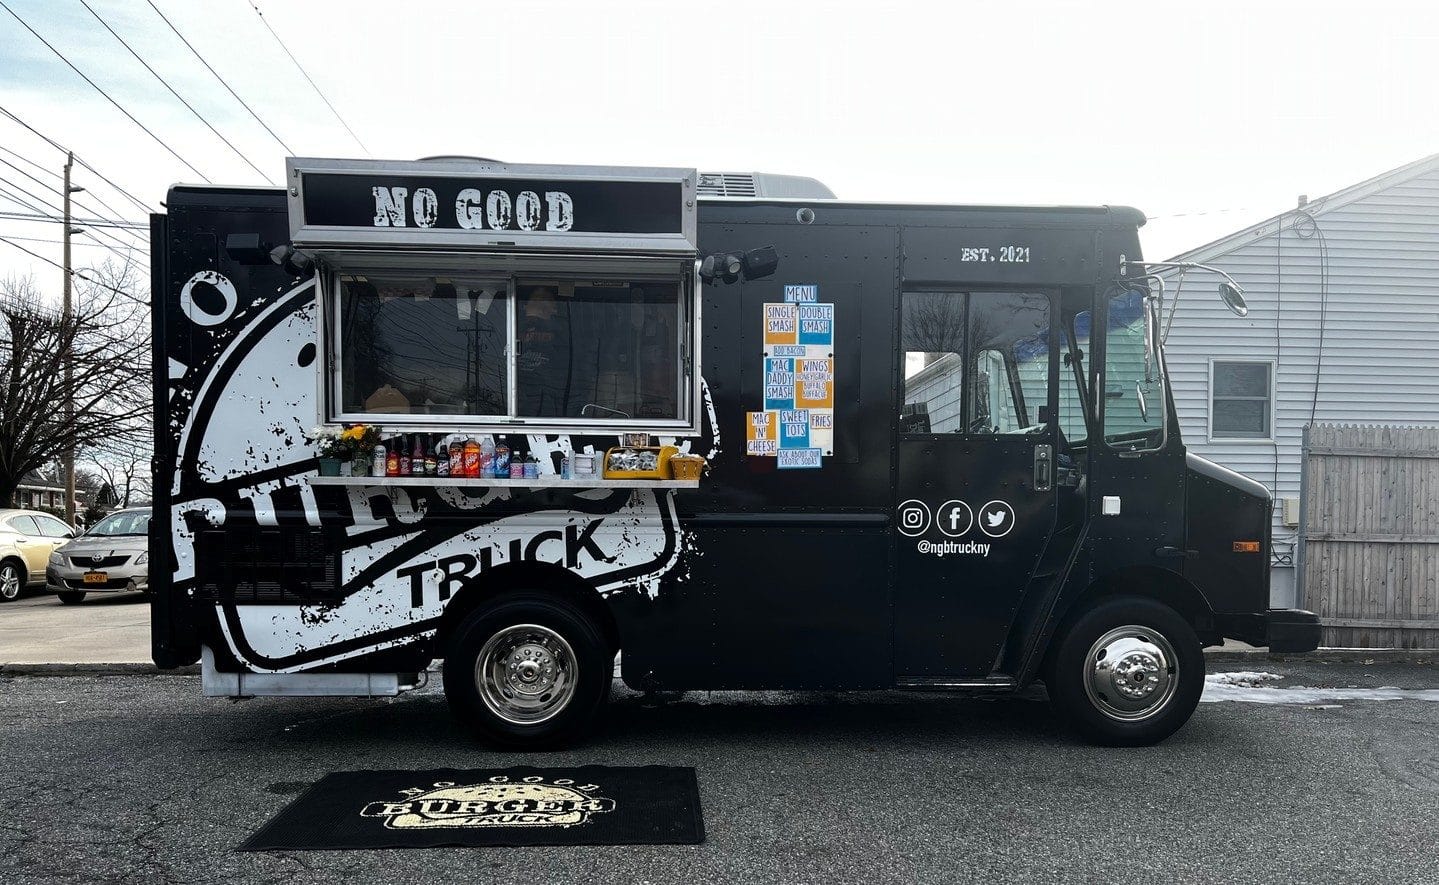 No good burger food truck parked for service